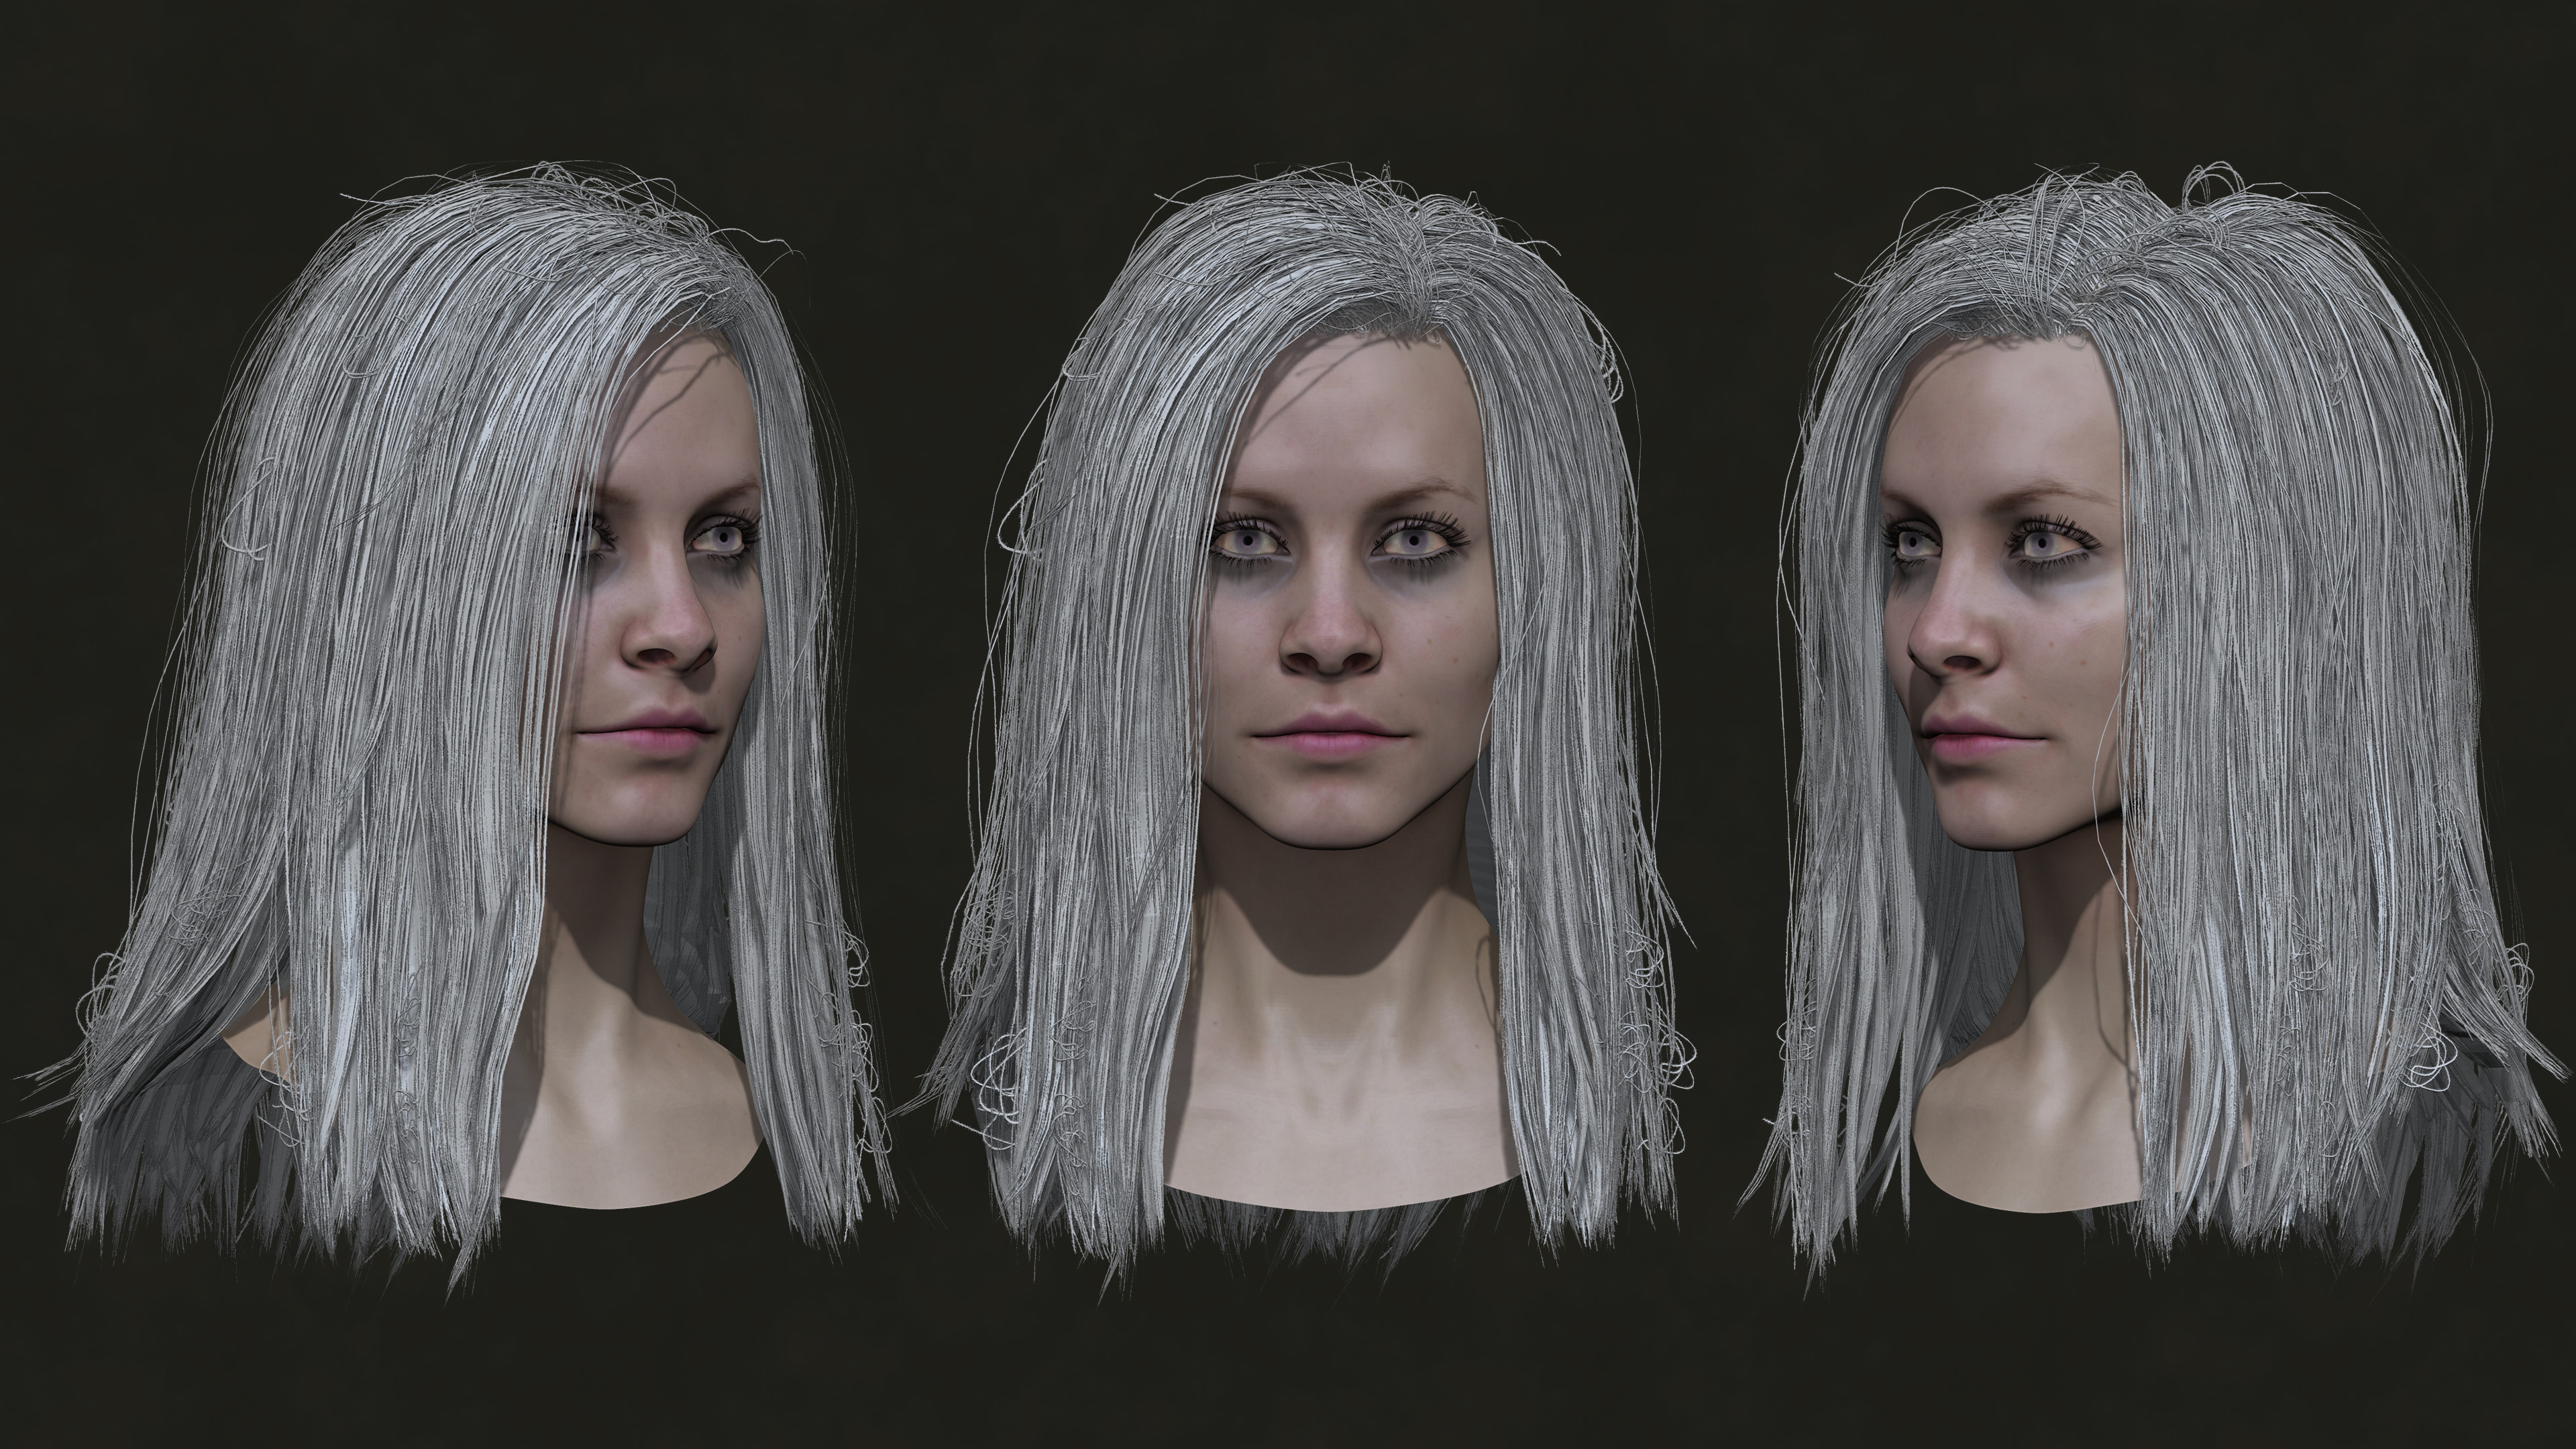 Head in ZBrush. Hair cards laid out in ZBrush